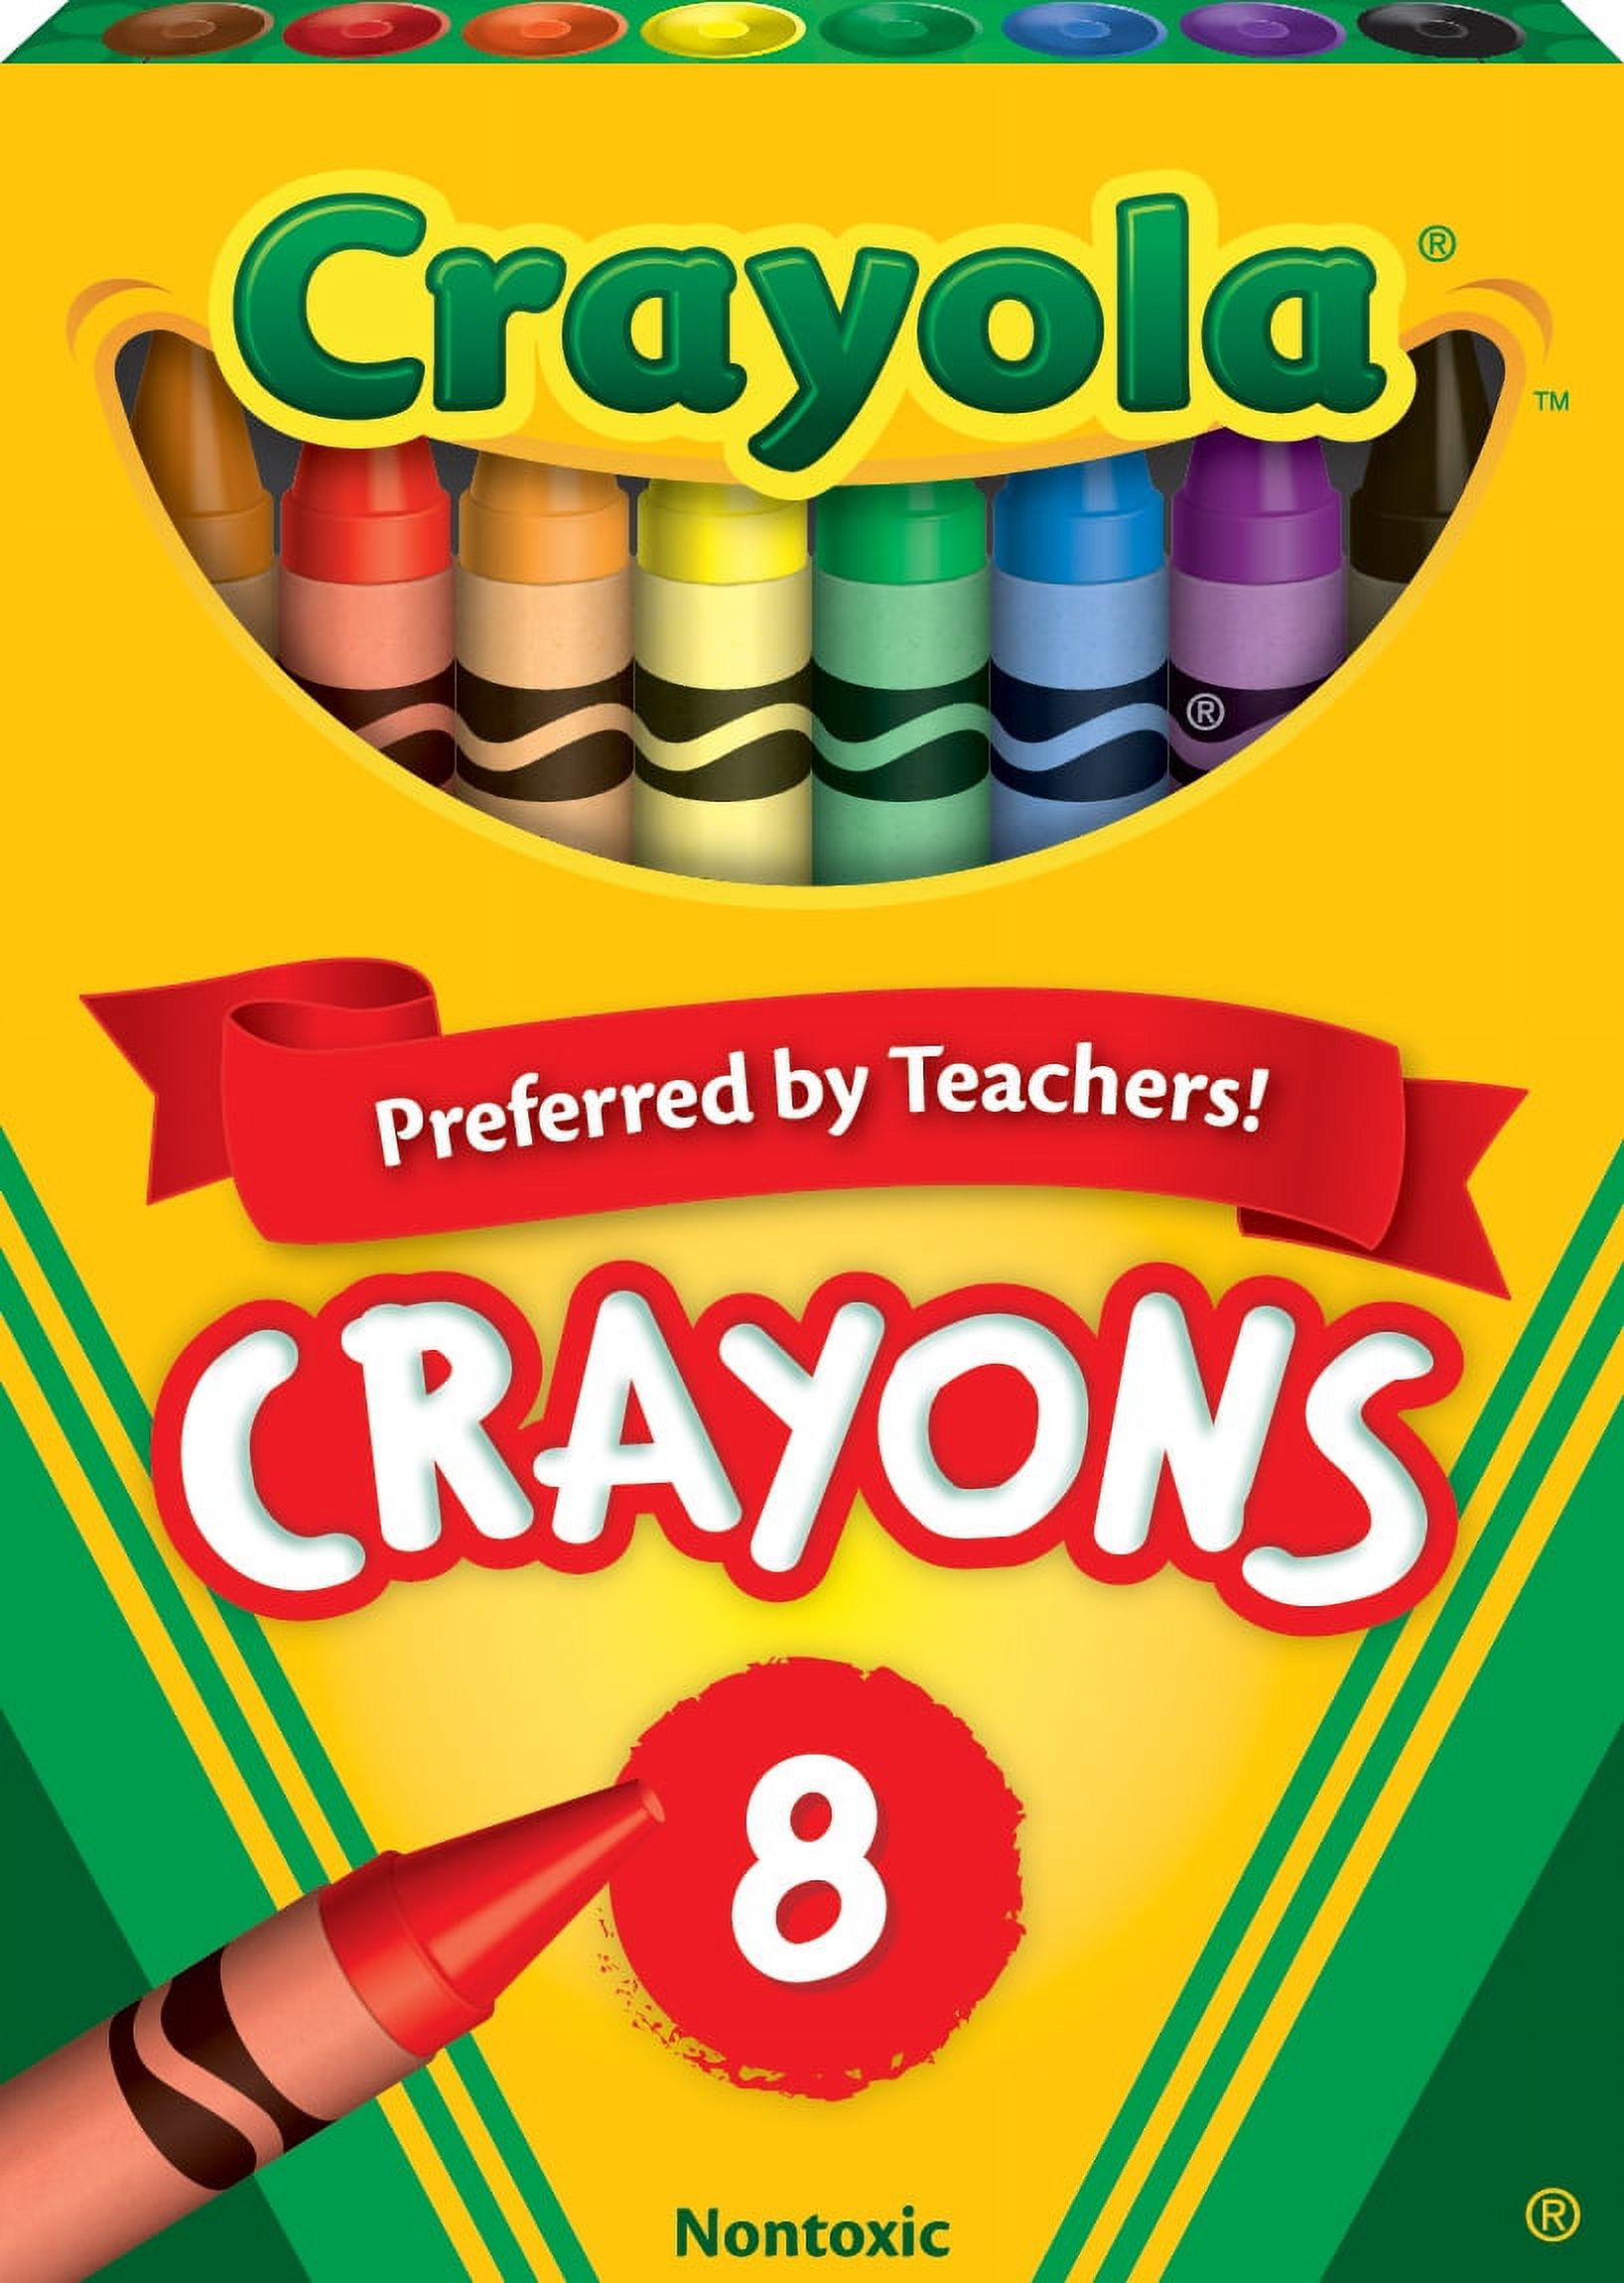 Crayola Classic Crayons, Back to School Supplies for Kids, 8 Ct, Art Supplies - image 1 of 10